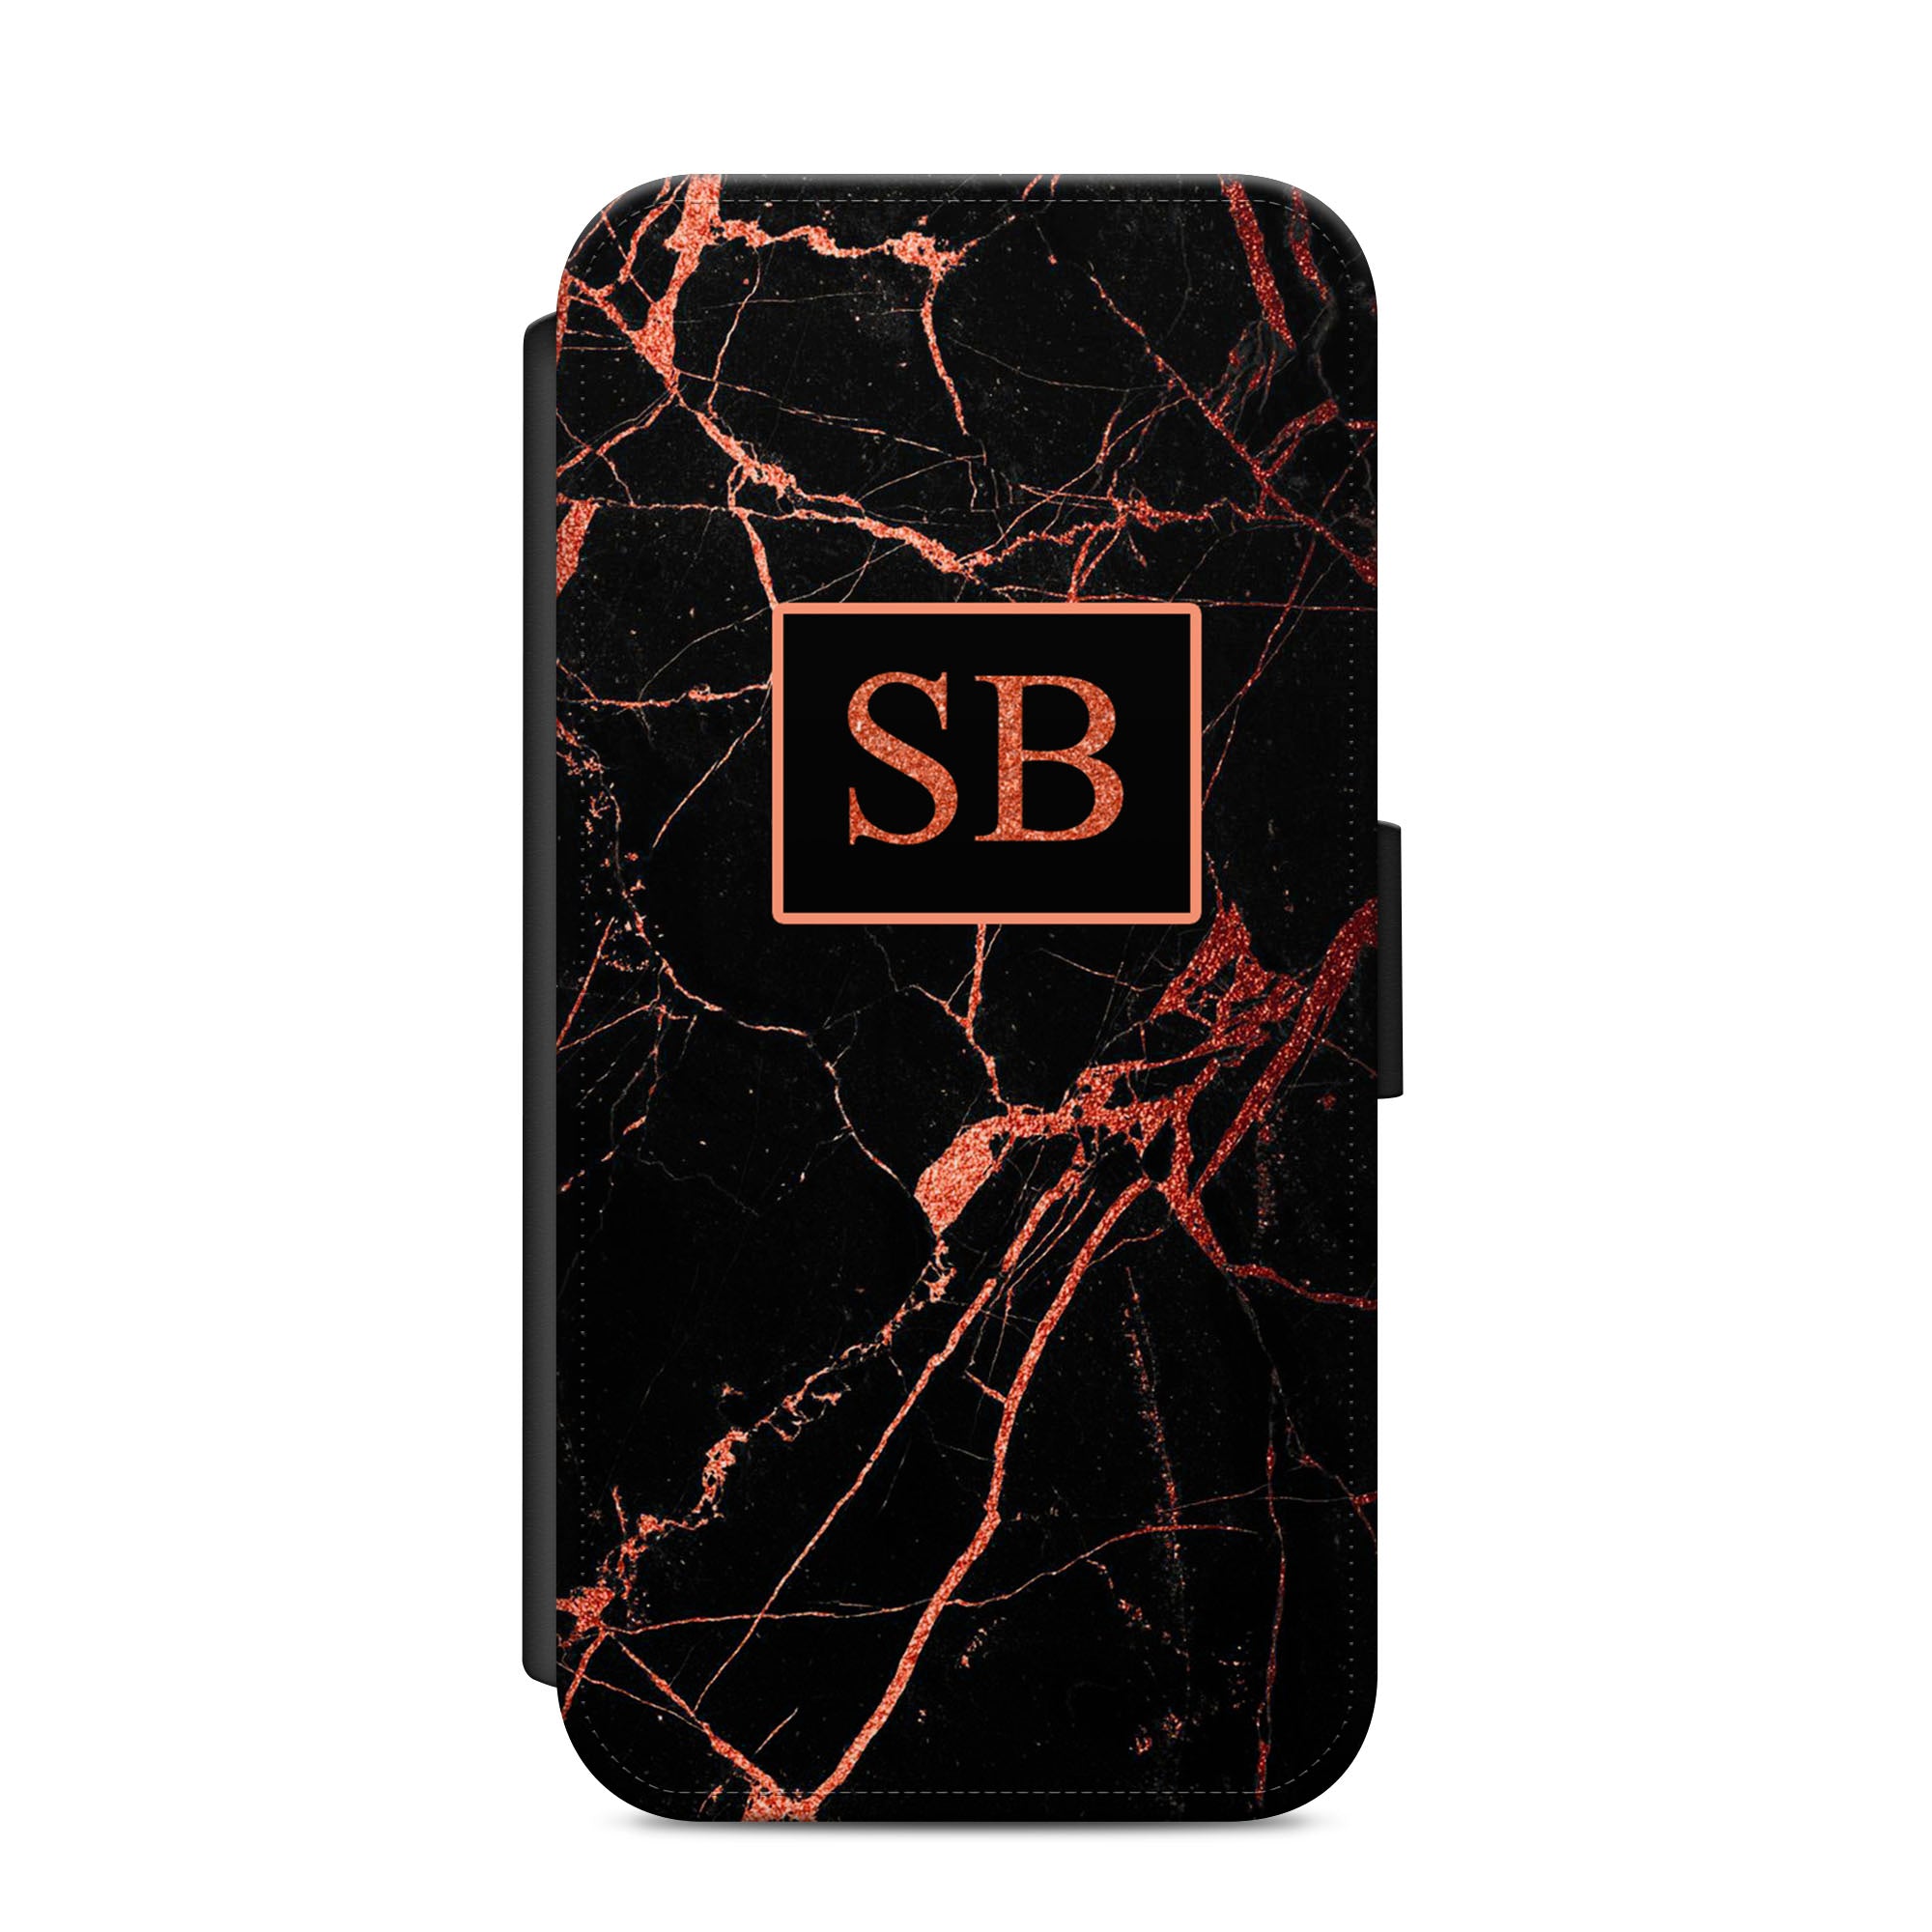 Personalised Red & Black Marble Faux Leather Flip Case Wallet for iPhone / Samsung